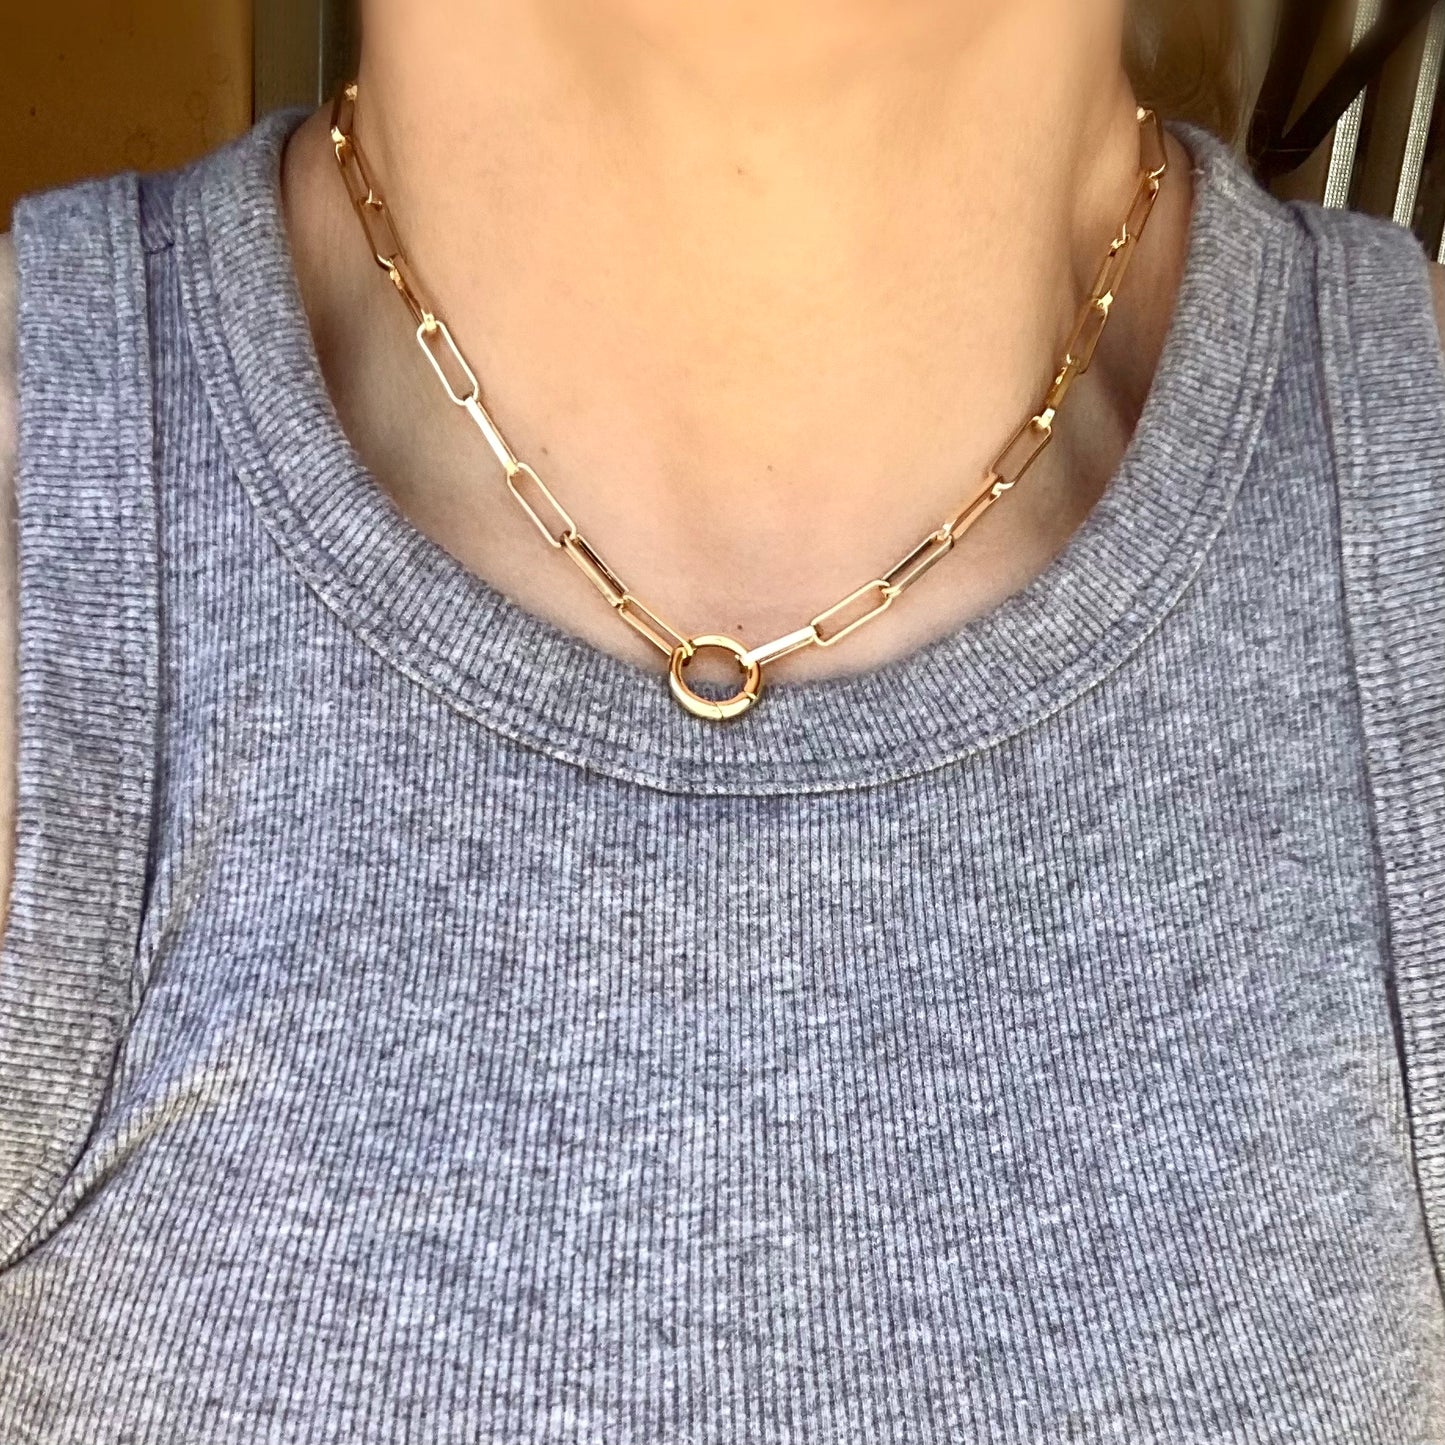 GoldFi 18k Gold Filled Paperclip Chain Necklace Featuring Carabine Clasp